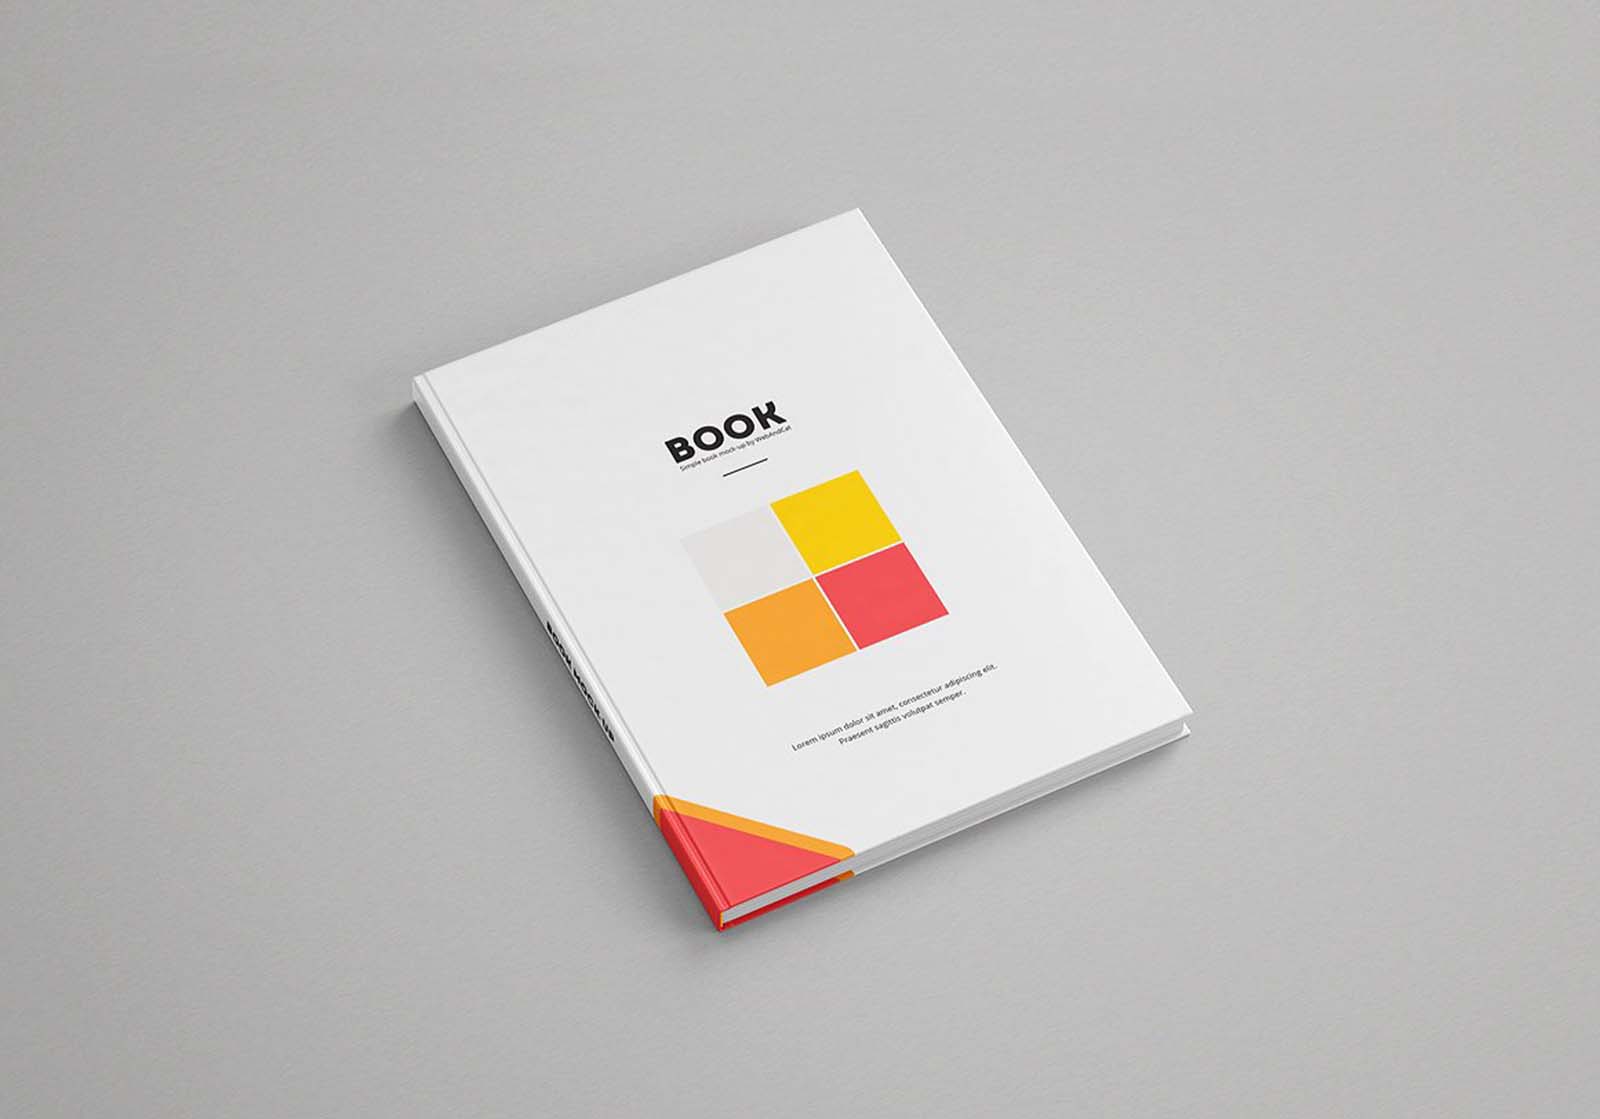 A modern psd book mockup with a minimalist cover design lying on a neutral background.